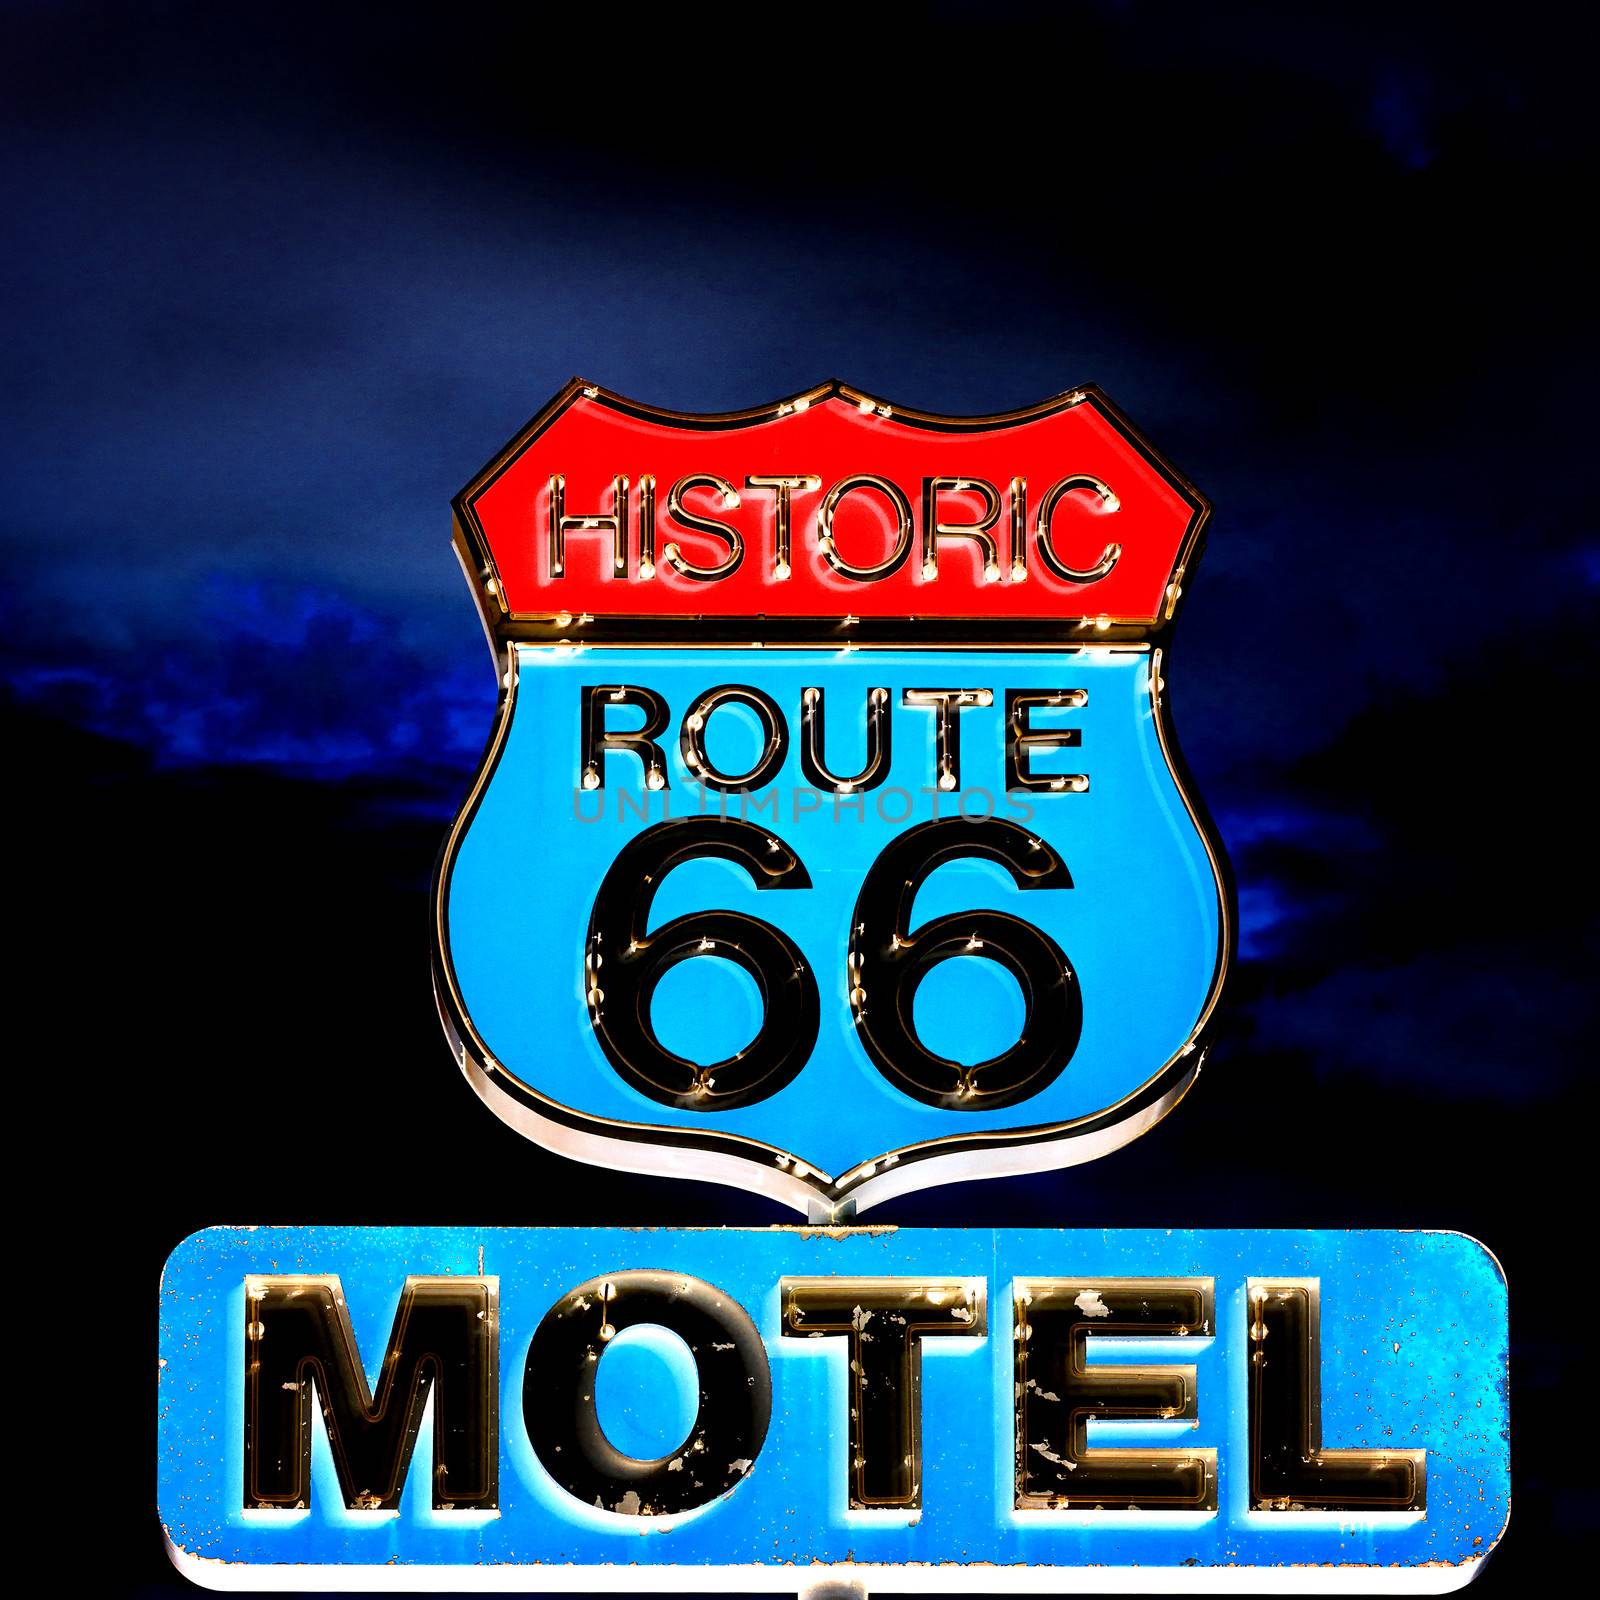 Route 66 at night by vwalakte